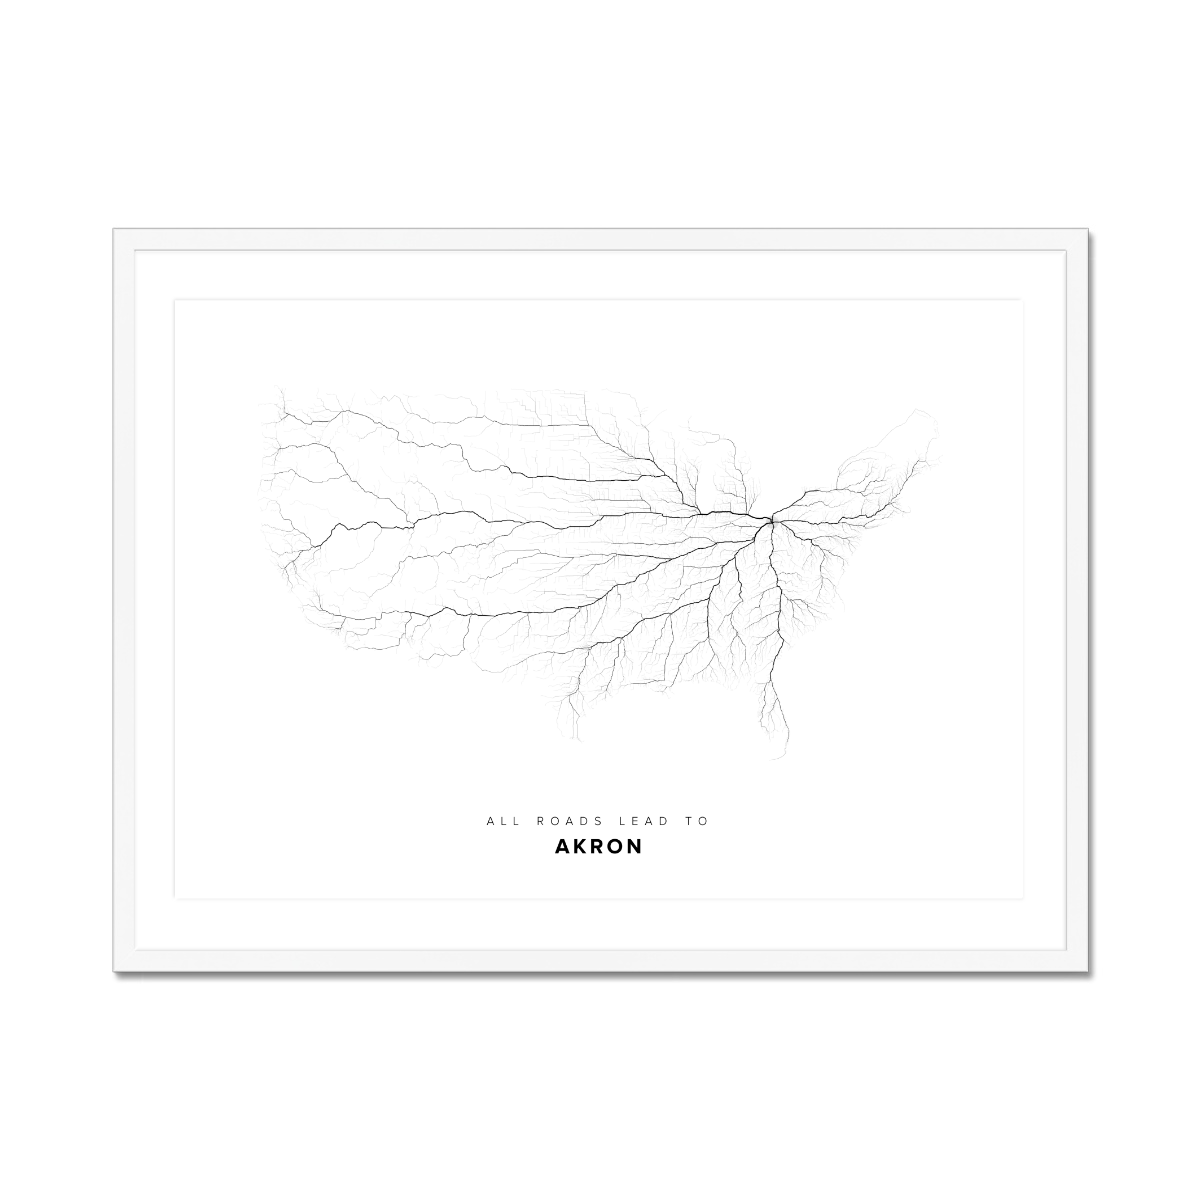 All roads lead to Akron (United States of America) Fine Art Map Print